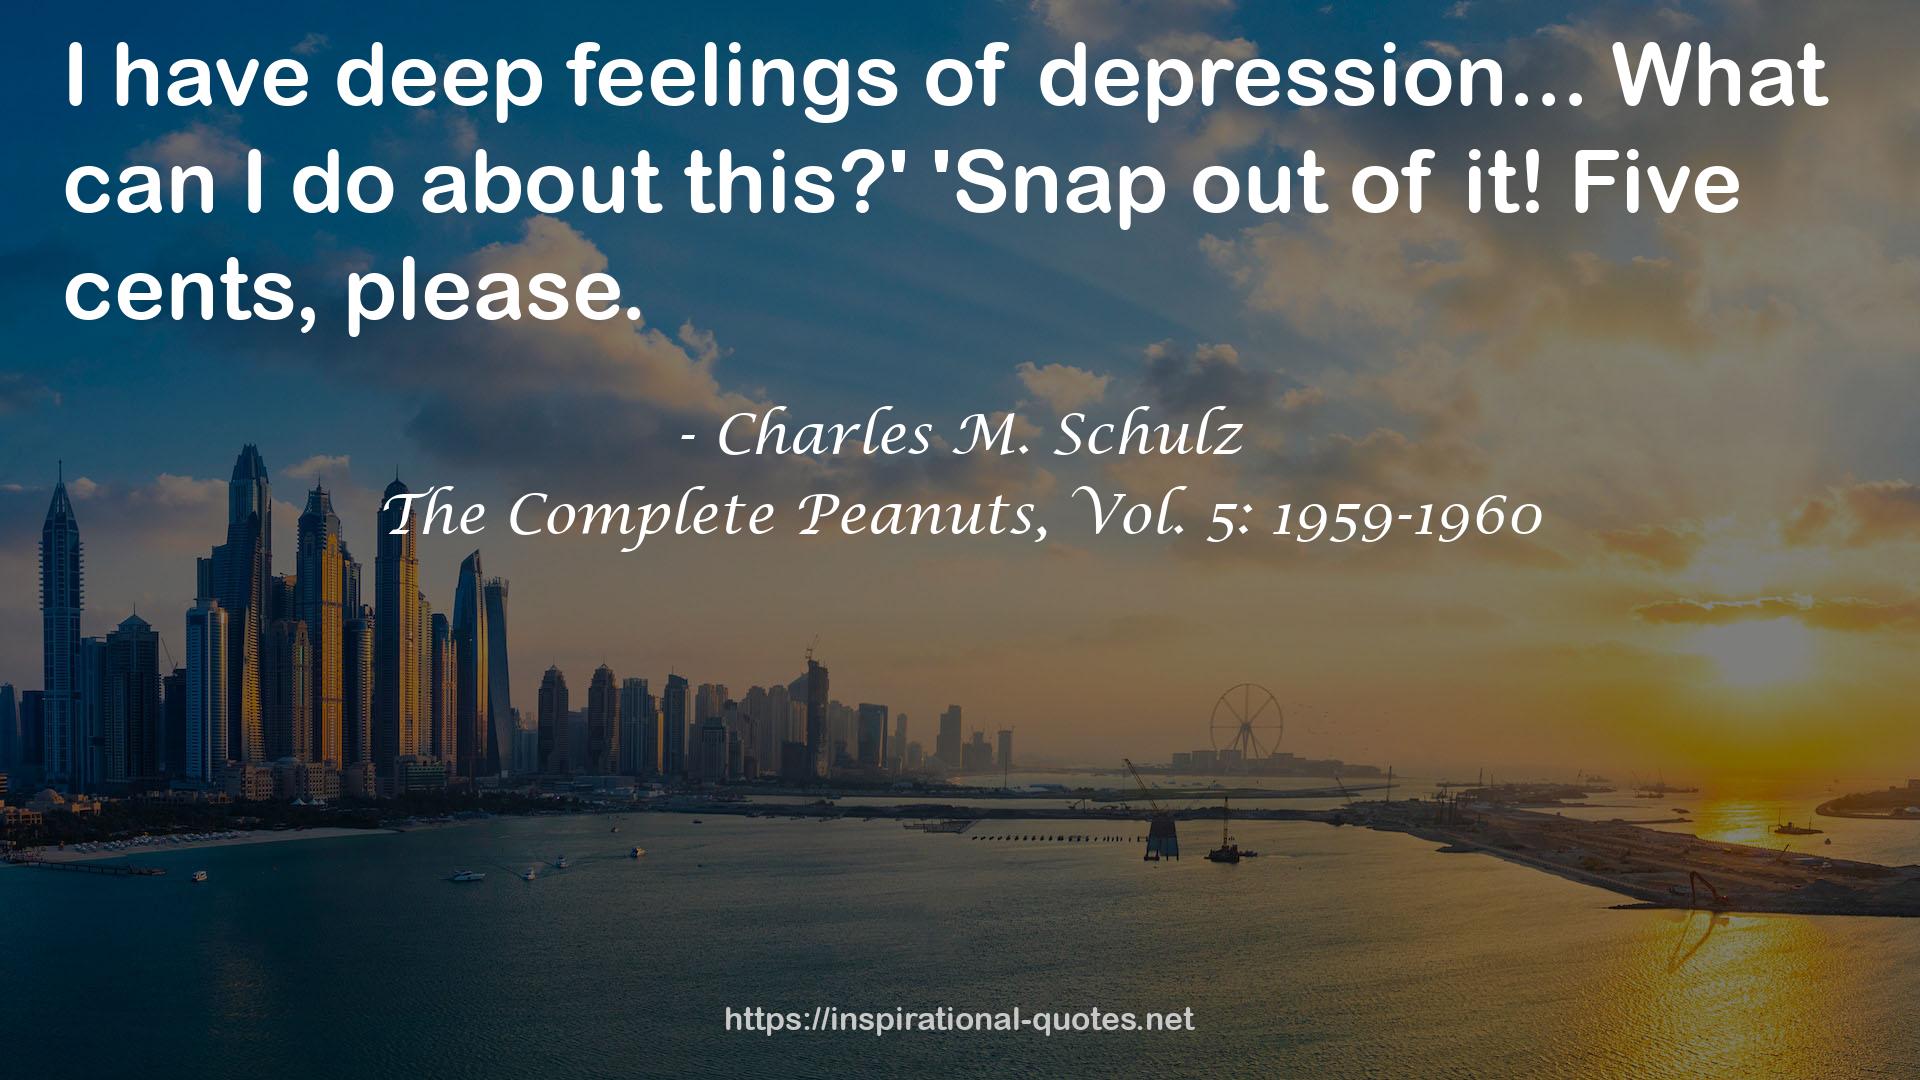 The Complete Peanuts, Vol. 5: 1959-1960 QUOTES